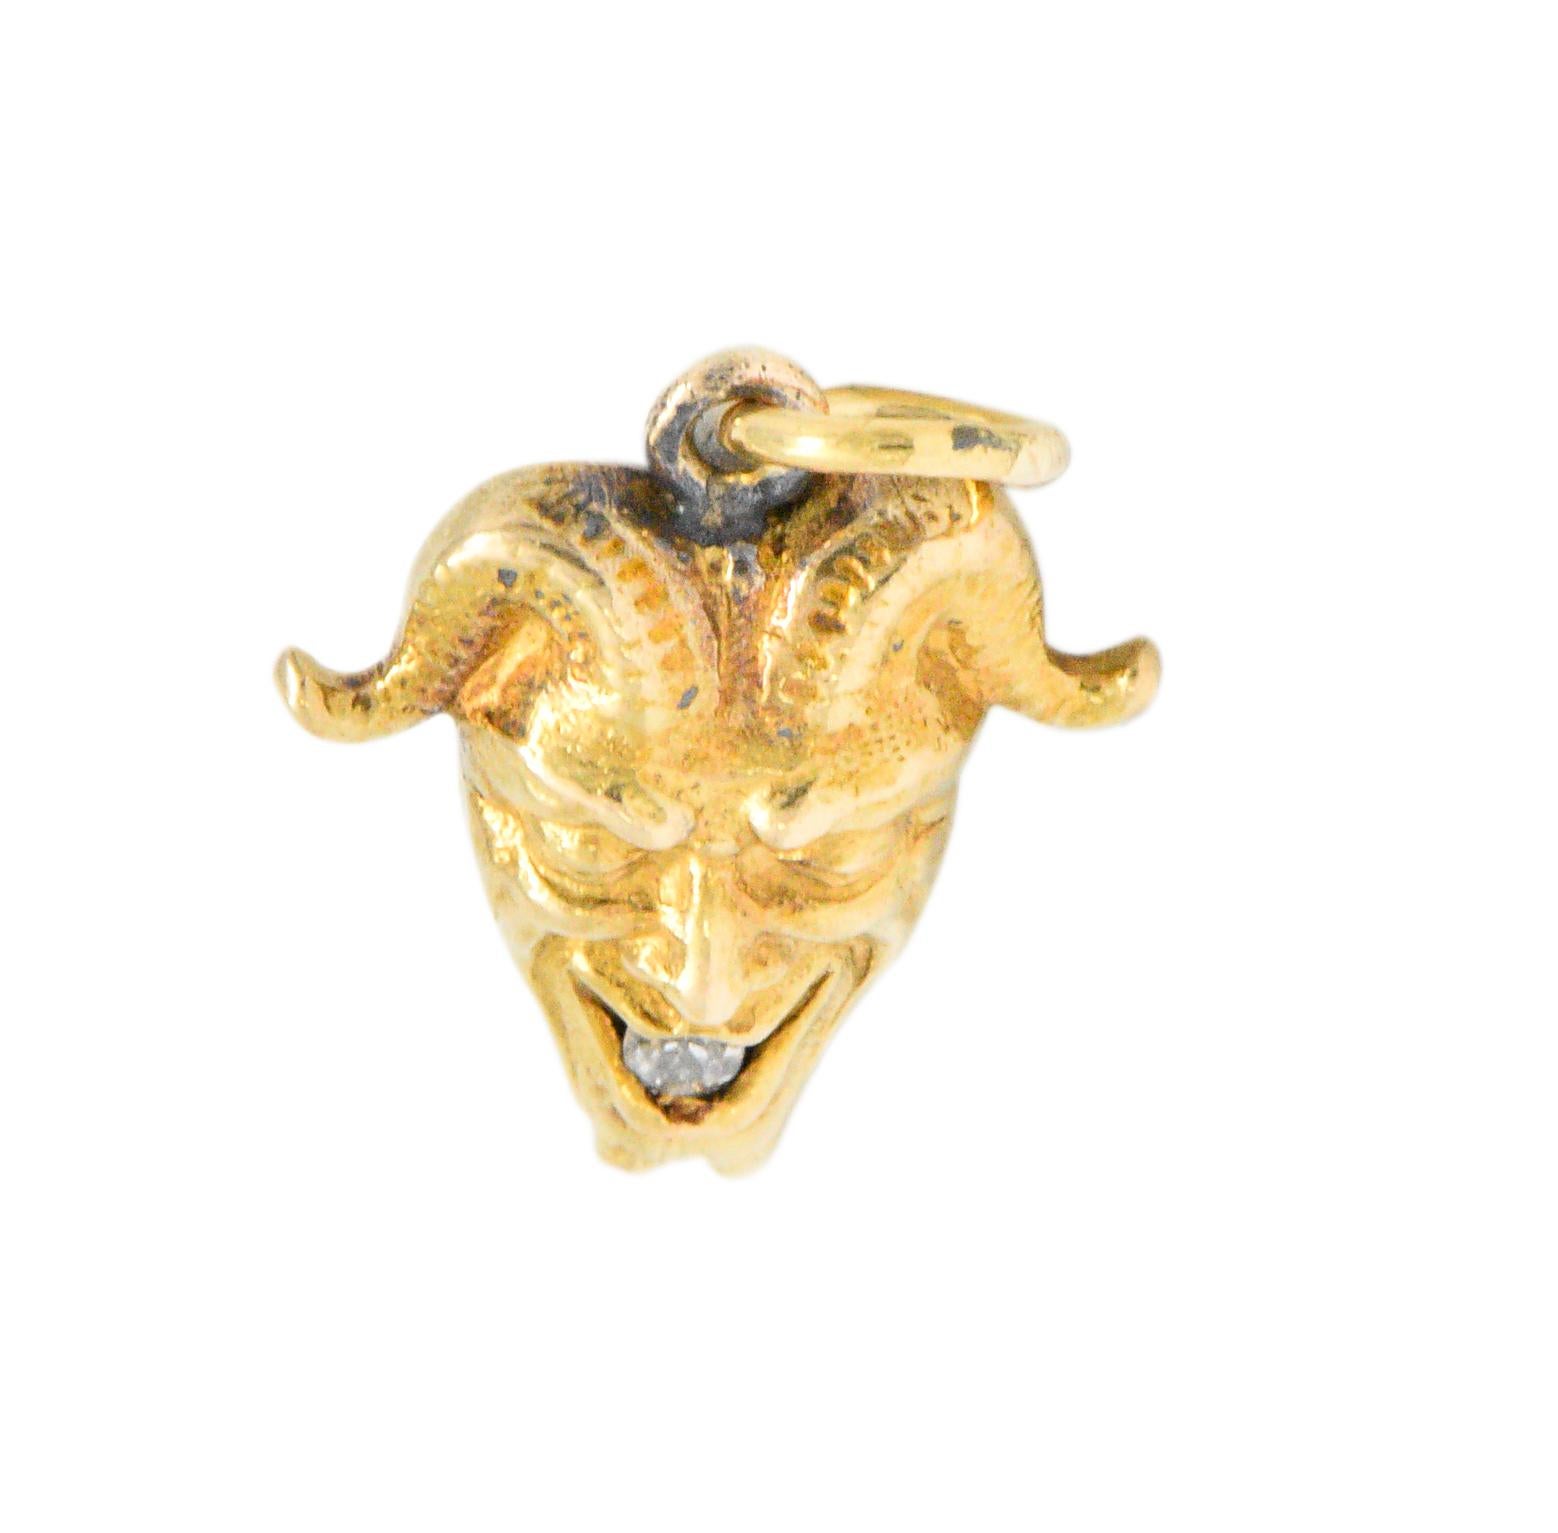 Featuring a very detailed solid gold devil charm with scrolled horns

1 Old mine cut diamond accent in the mouth

Measures 14 mm x 13 mm x 4 mm

Tested as 14k gold and marked

Total Weight: 1.4 Grams

Circa 1900 Late Victorian period

Ornate.